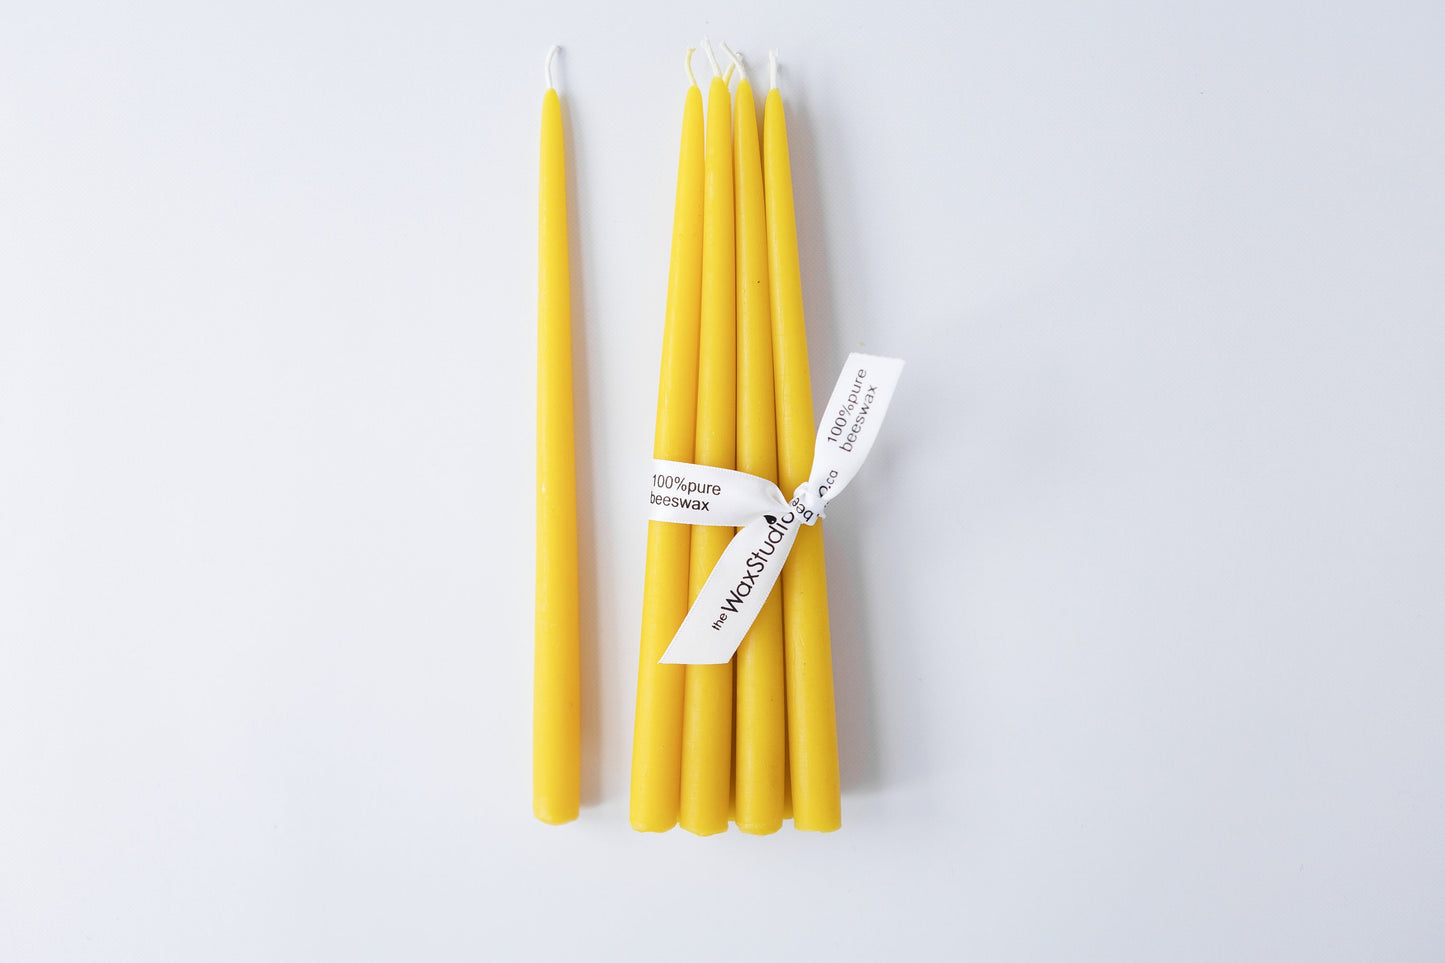 Half-inch Beeswax Slim Taper Candles SET of 6 / Yellow Beeswax, Candles // for Vintage Midcentury Modern Holders, Tapers, Beeswax Candles